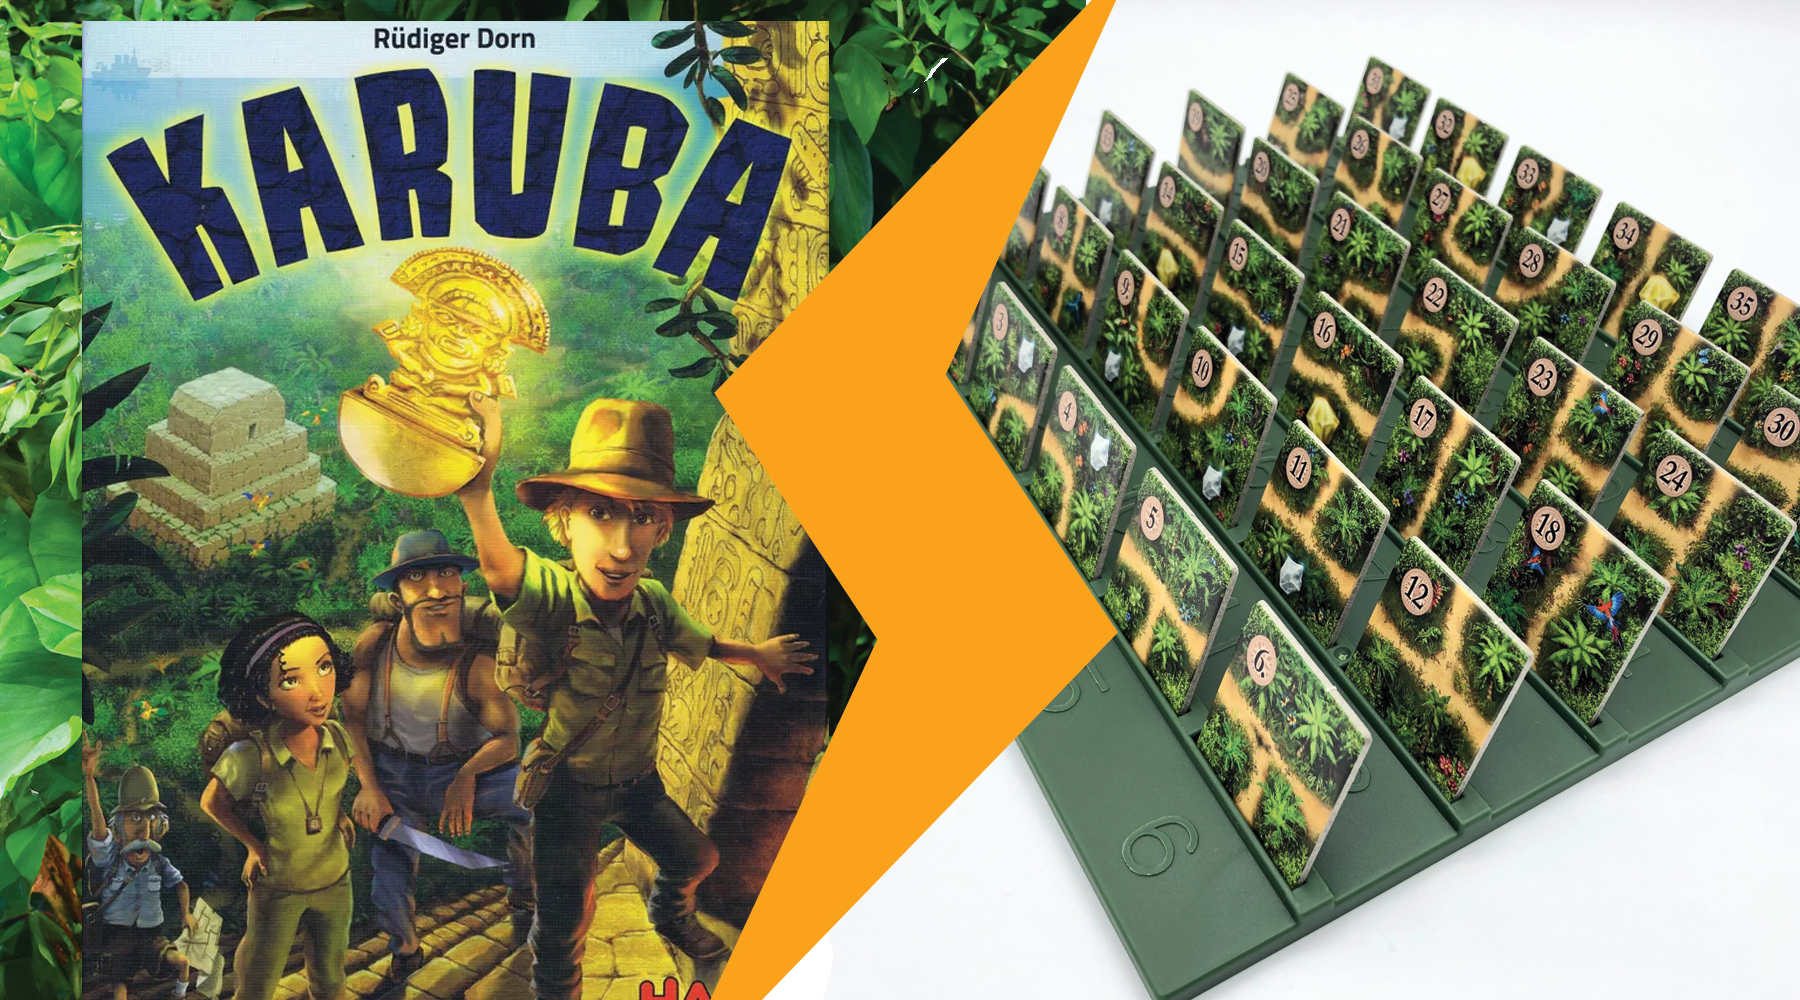 Two images side by side, separated by a lightning bolt. On the left side, the cover image for the board game Karuba. On the right side, a green plastic tray holding tiles from the game on a white background.